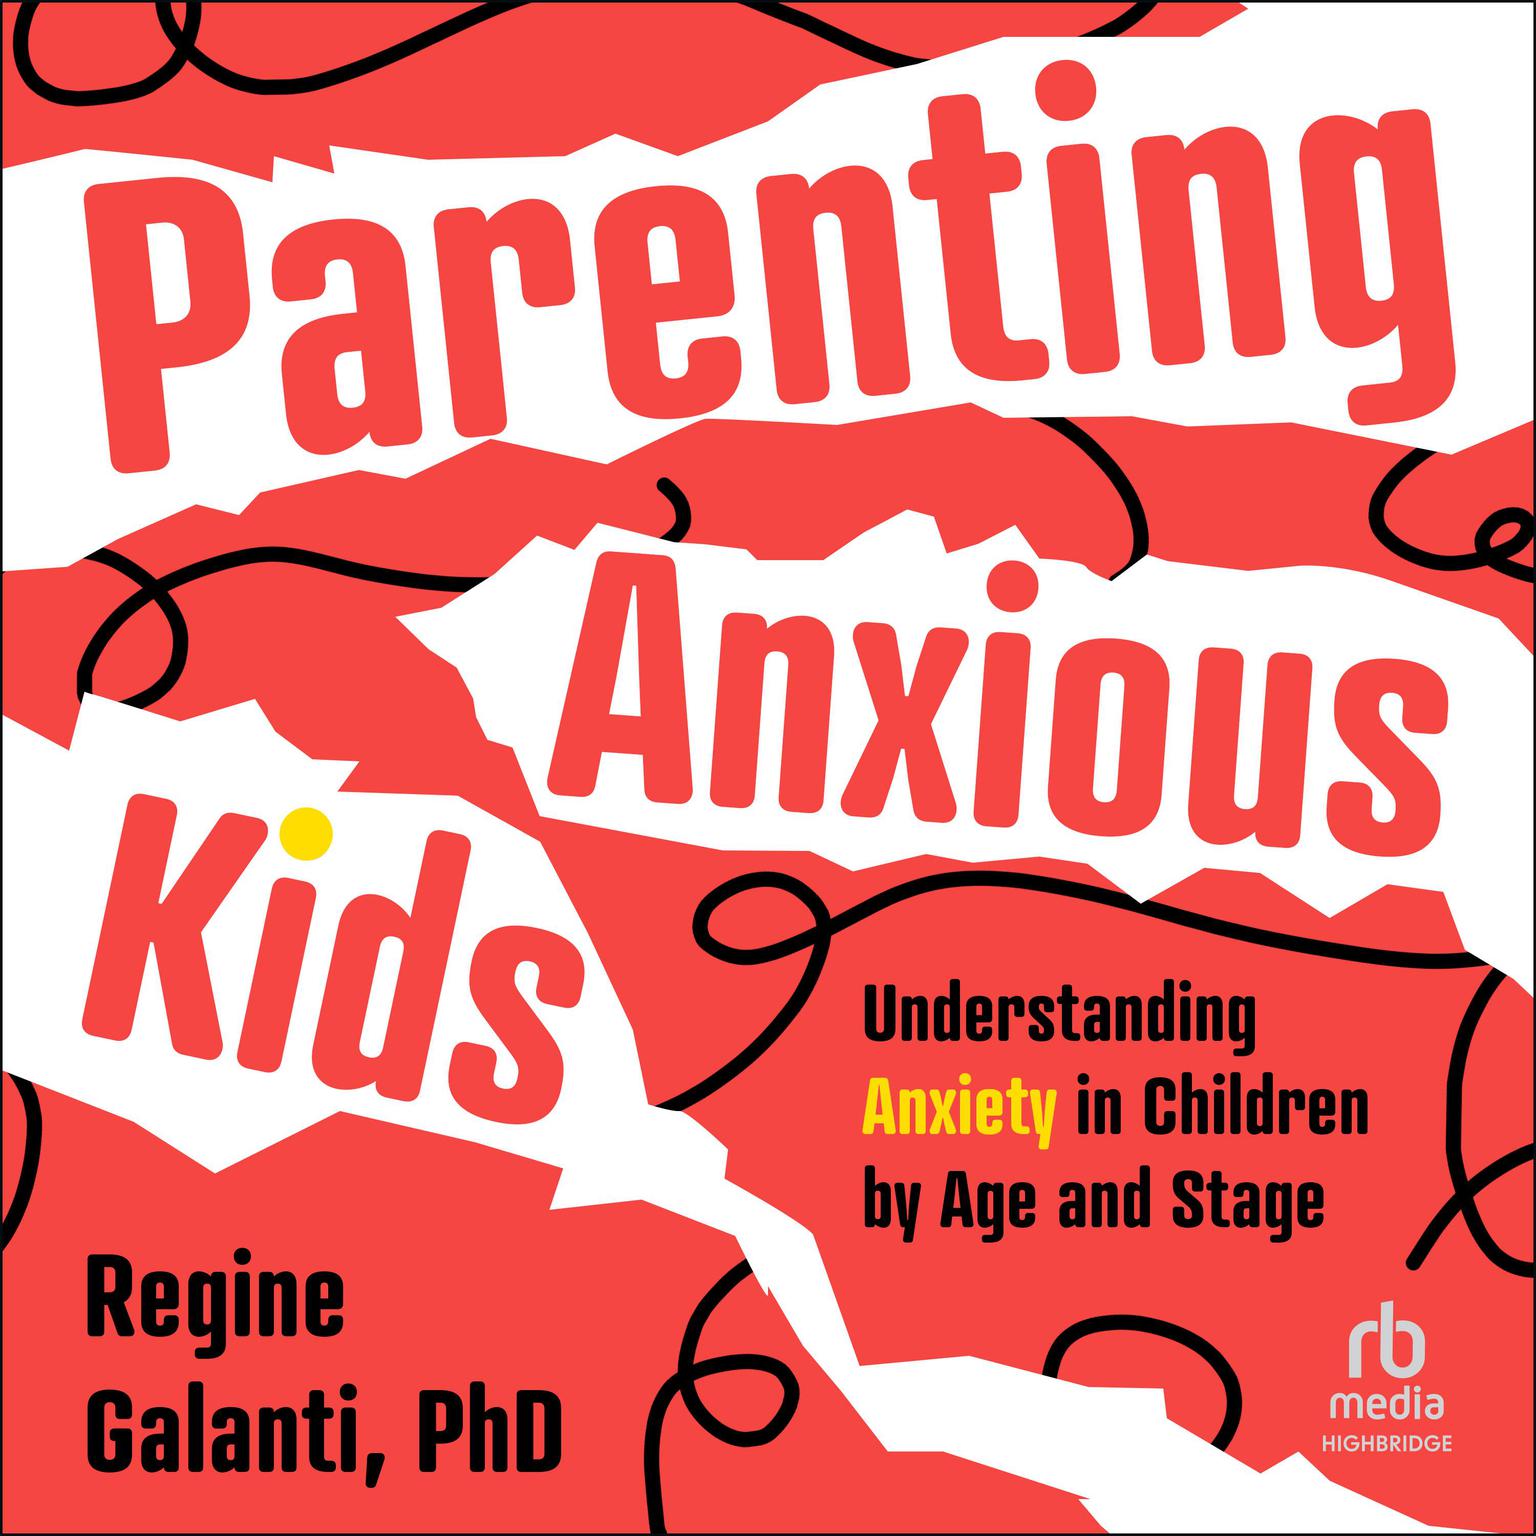 Parenting Anxious Kids: Understanding Anxiety in Children by Age and Stage Audiobook, by Regine Galanti